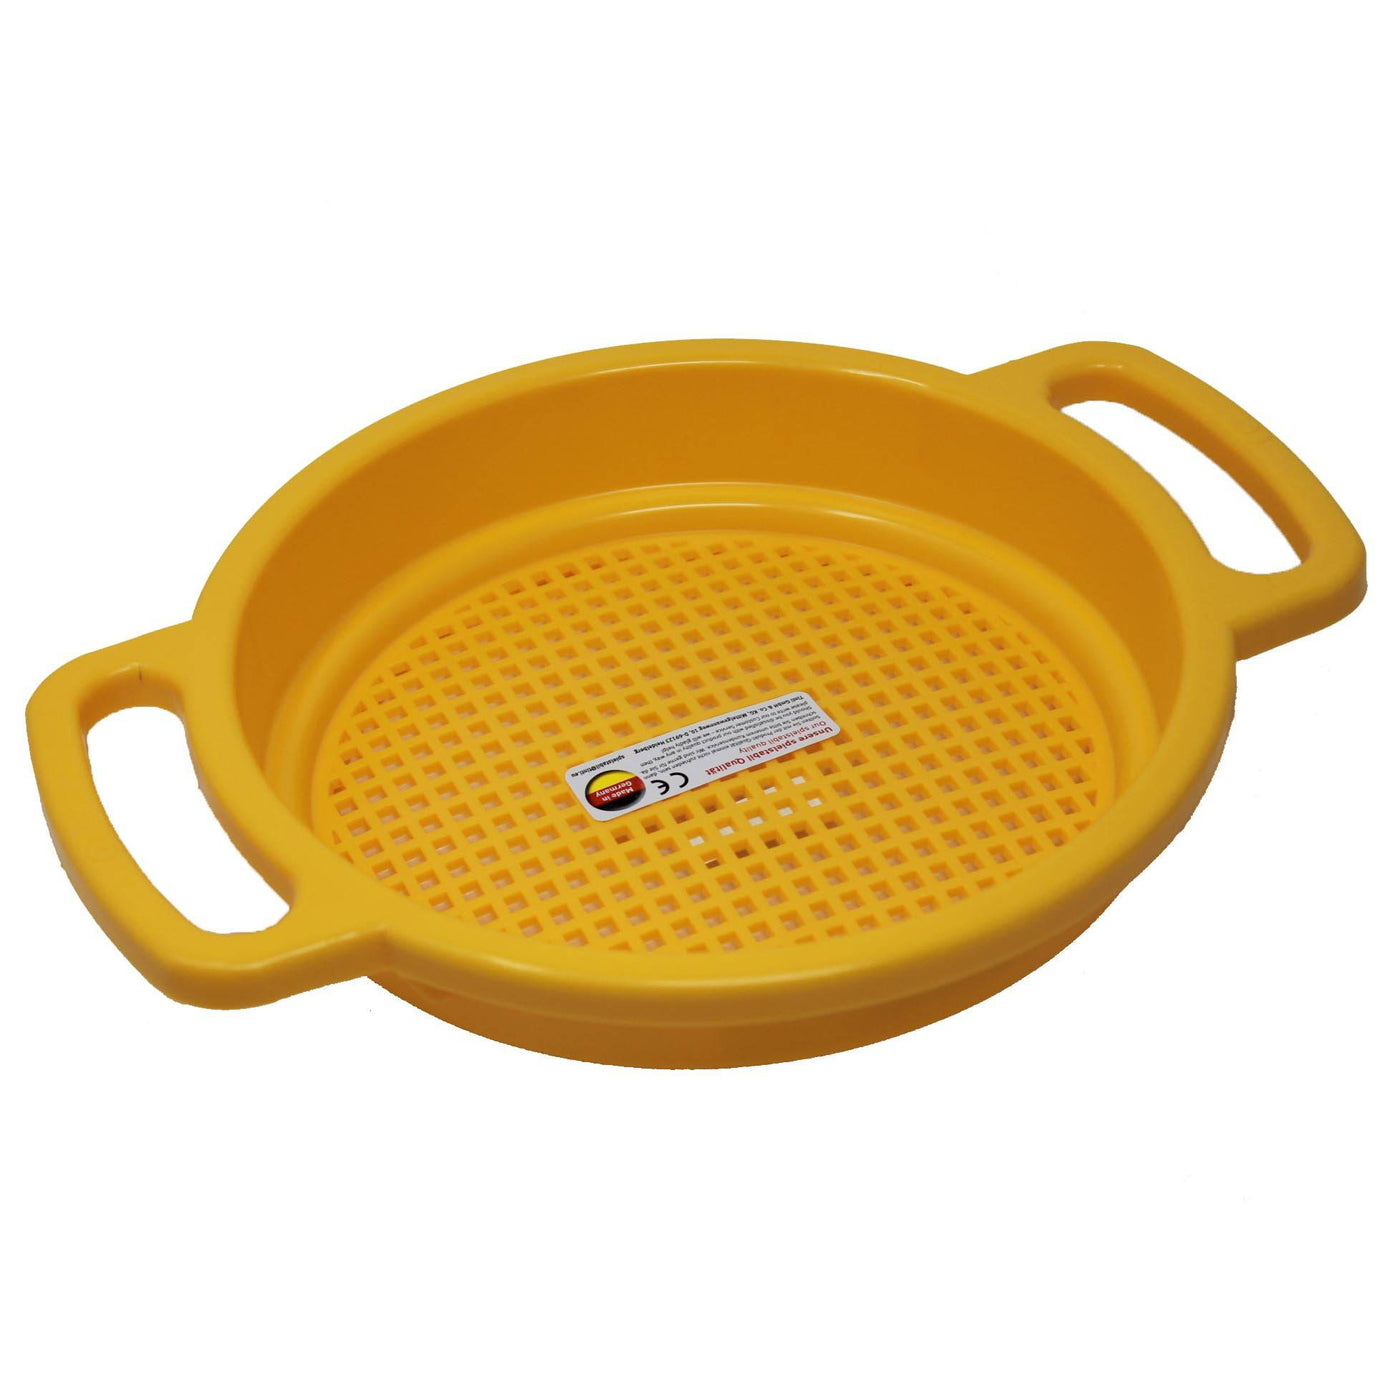 Sand Sieve Large (assorted colors) - HABA USA